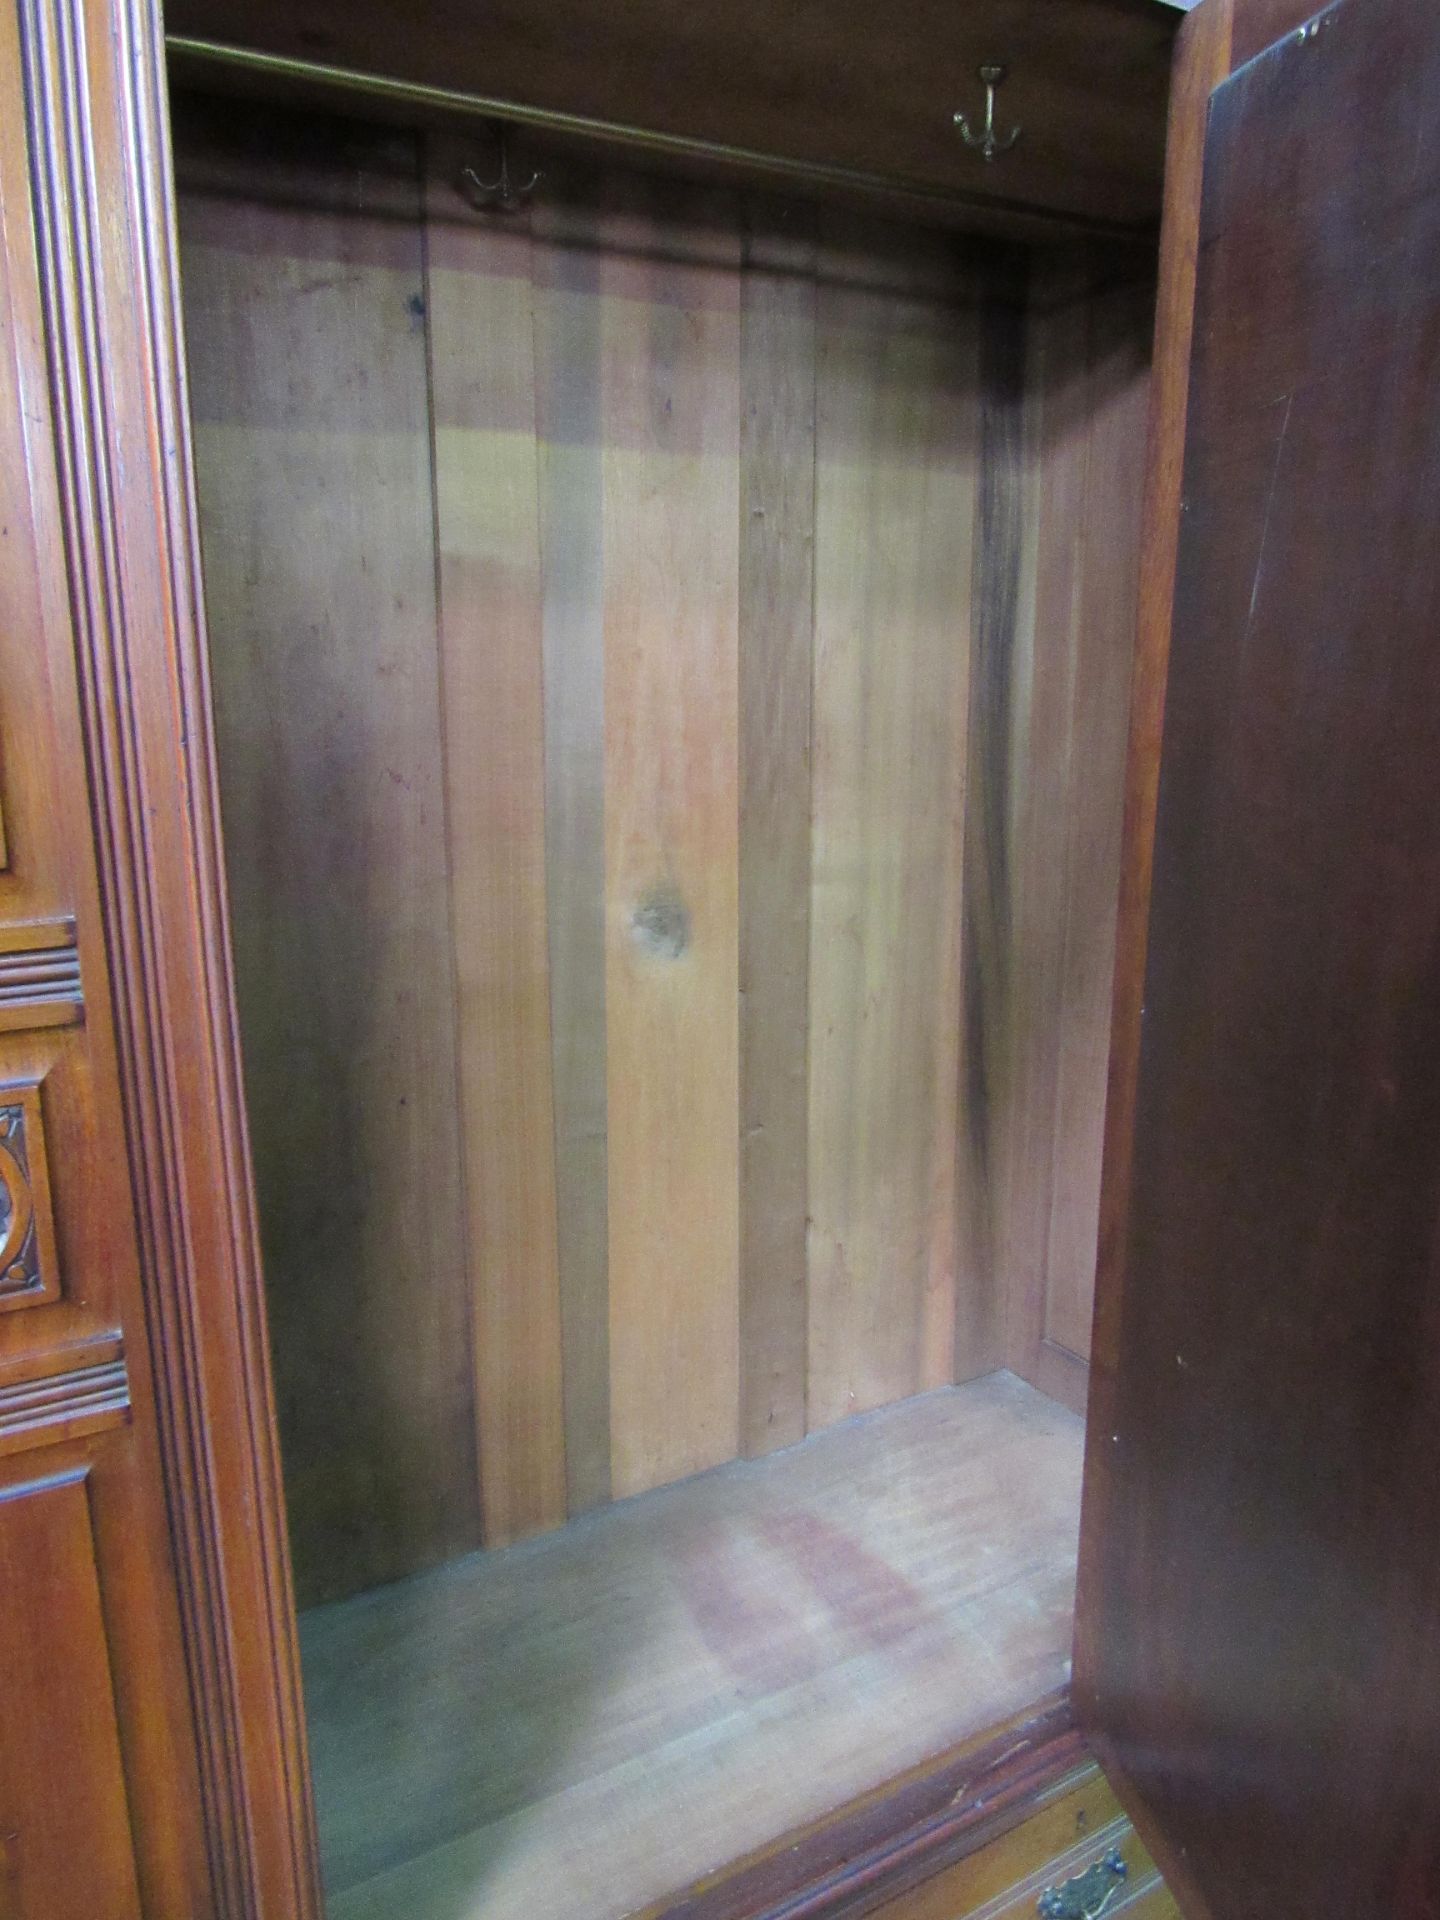 Mahogany wardrobe with mirror door over 2 and 1 drawers. 132 x 51 x 207cms. Estimate £30-50. - Image 4 of 4